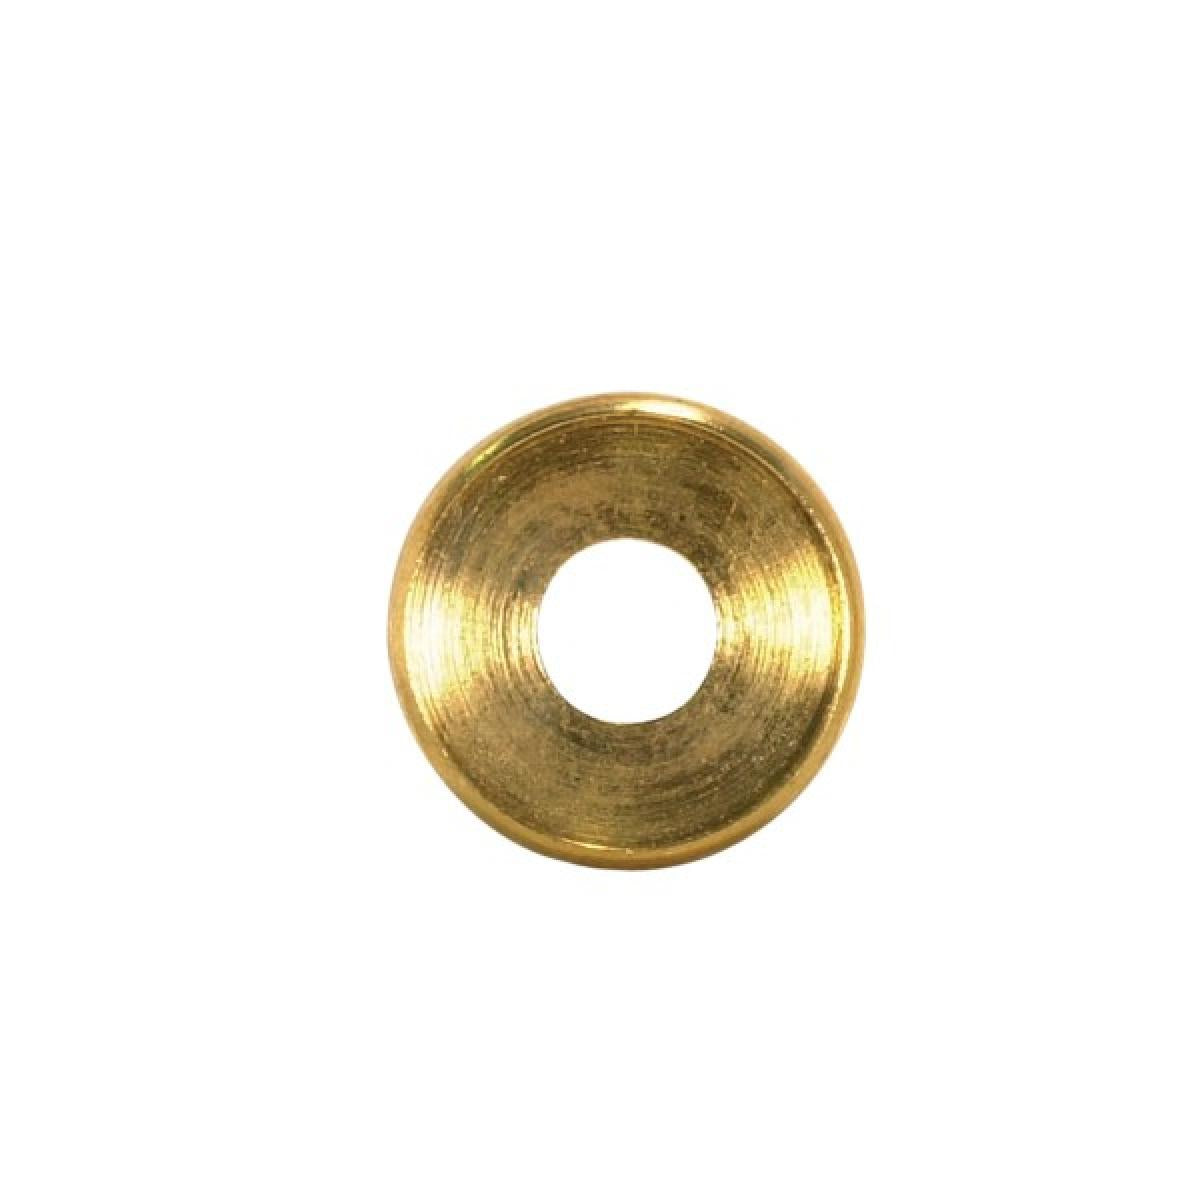 Satco 90-2151 Turned Brass Double Check Ring 1/8 IP Slip Burnished And Lacquered 3/4" Diameter